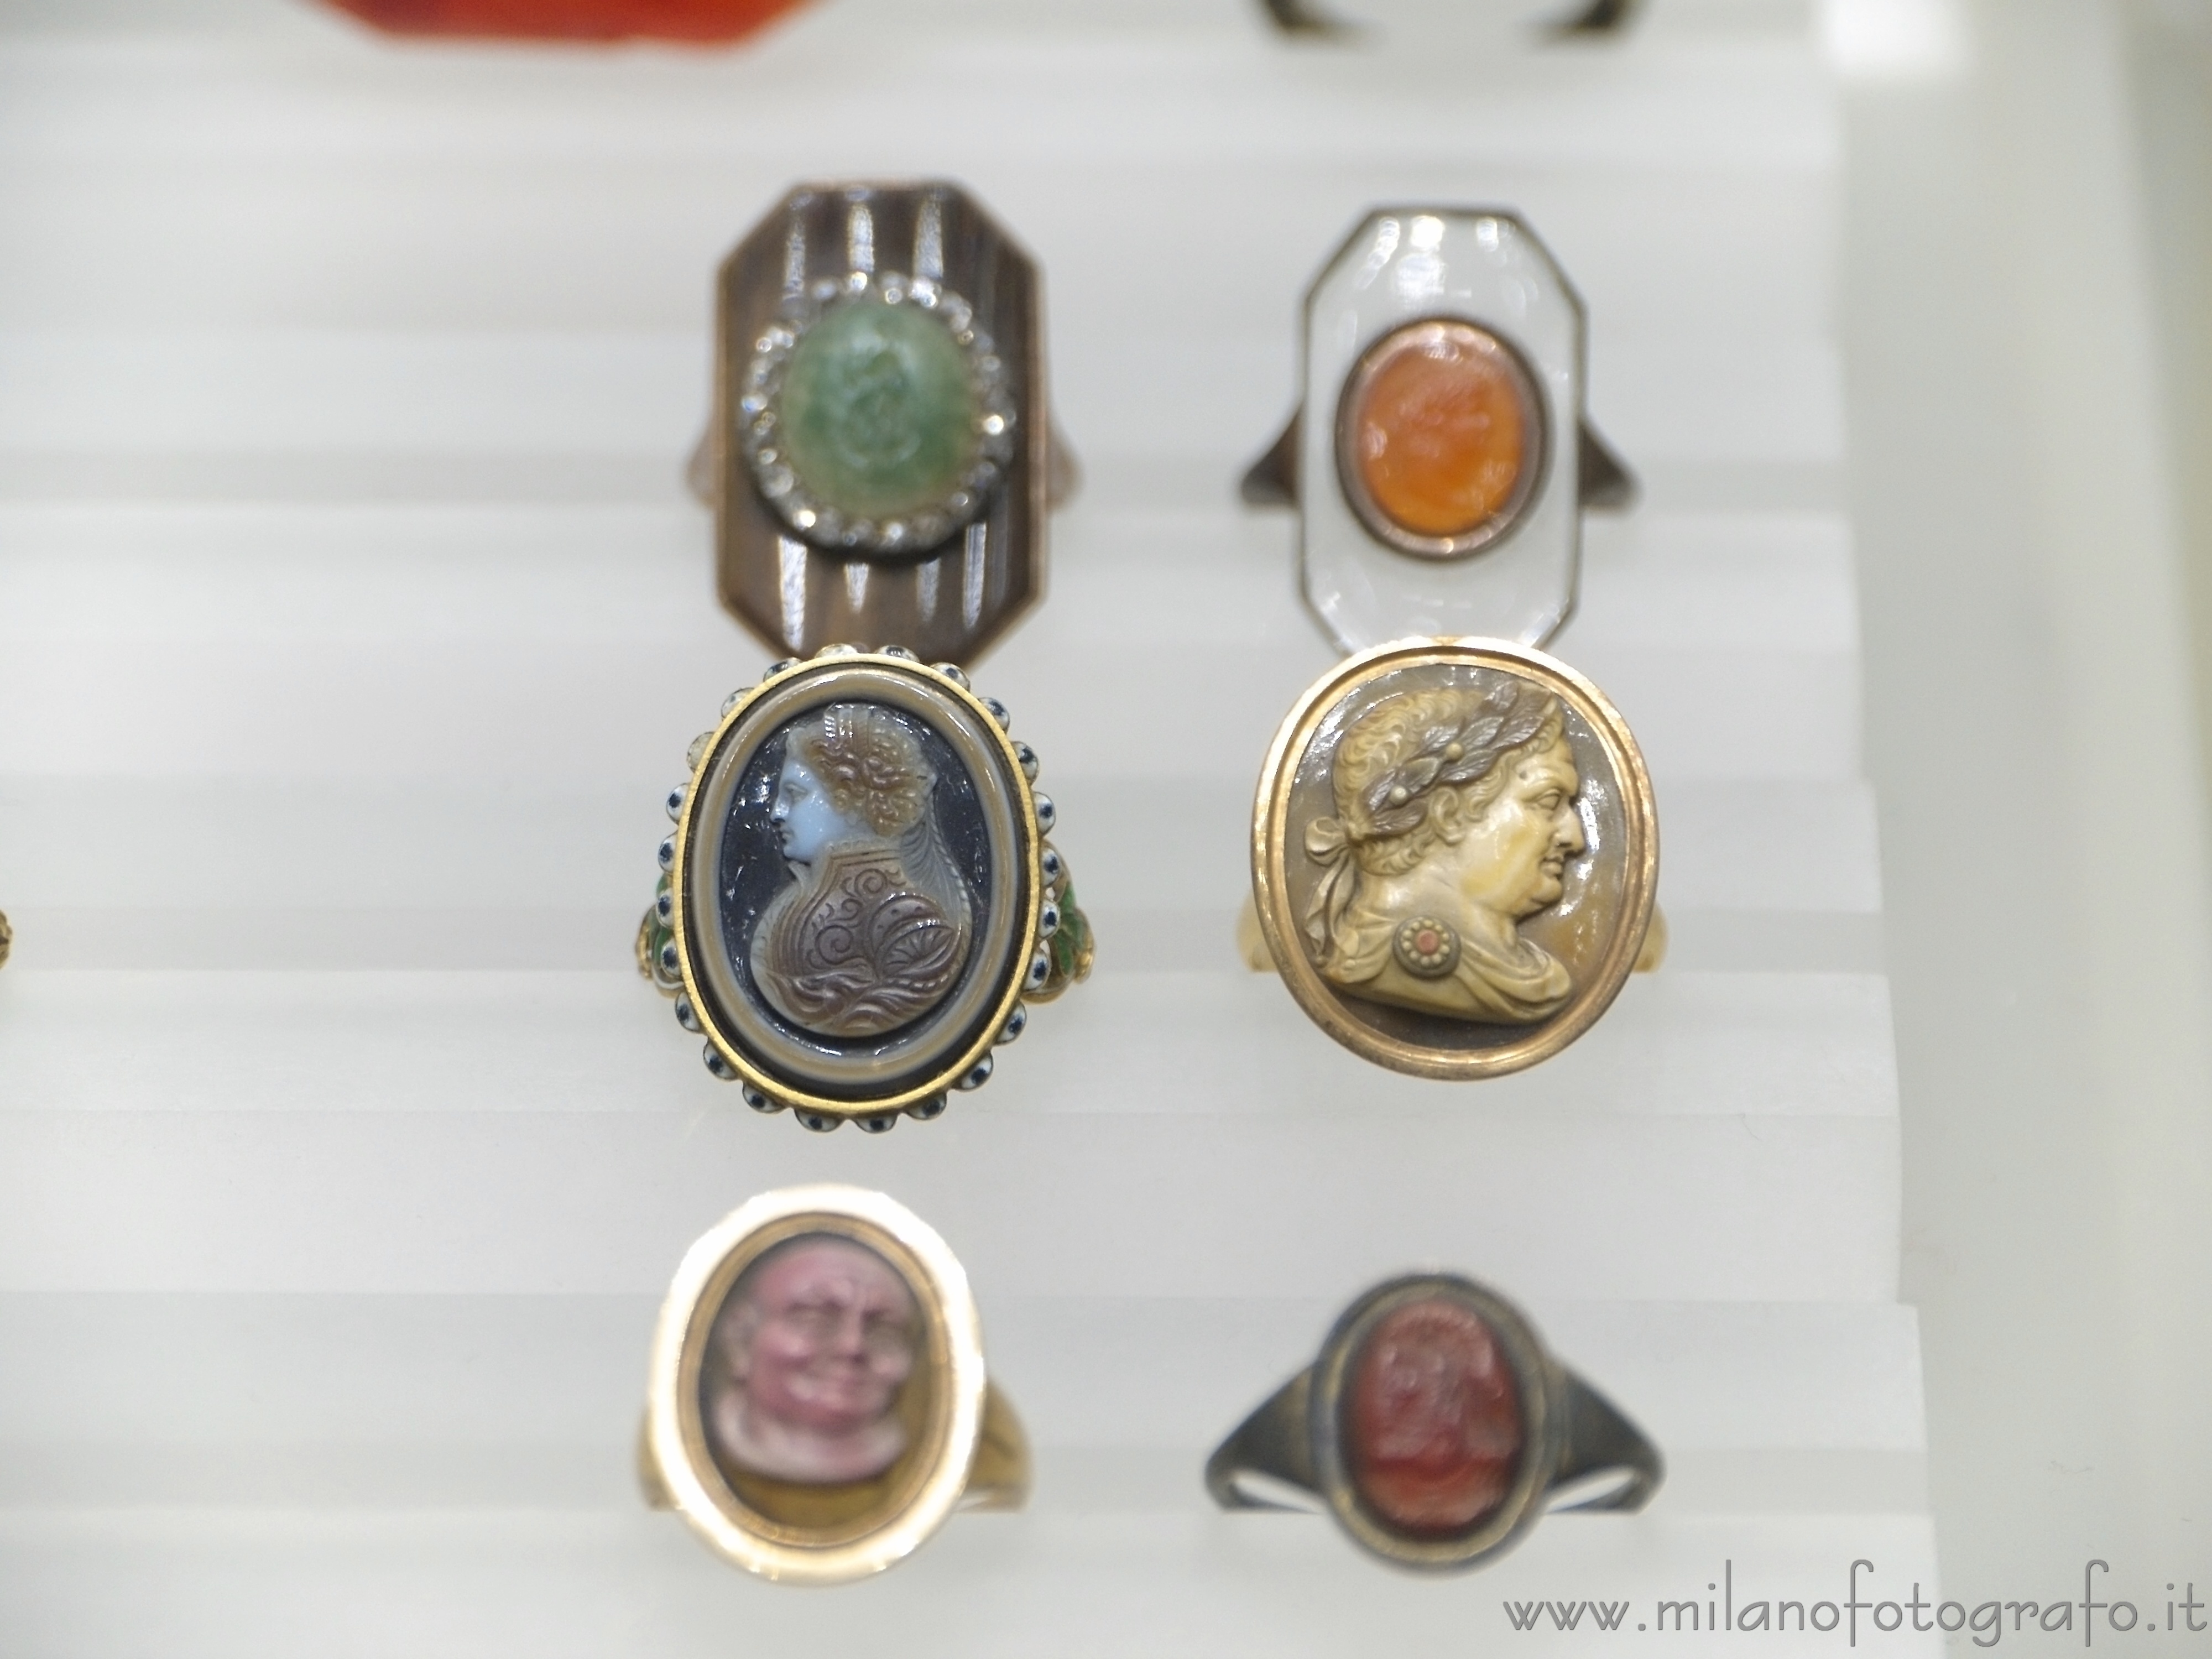 Milan (Italy): Rings of the collection of ancient jewels in the Museum Poldi Pezzoli - Milan (Italy)